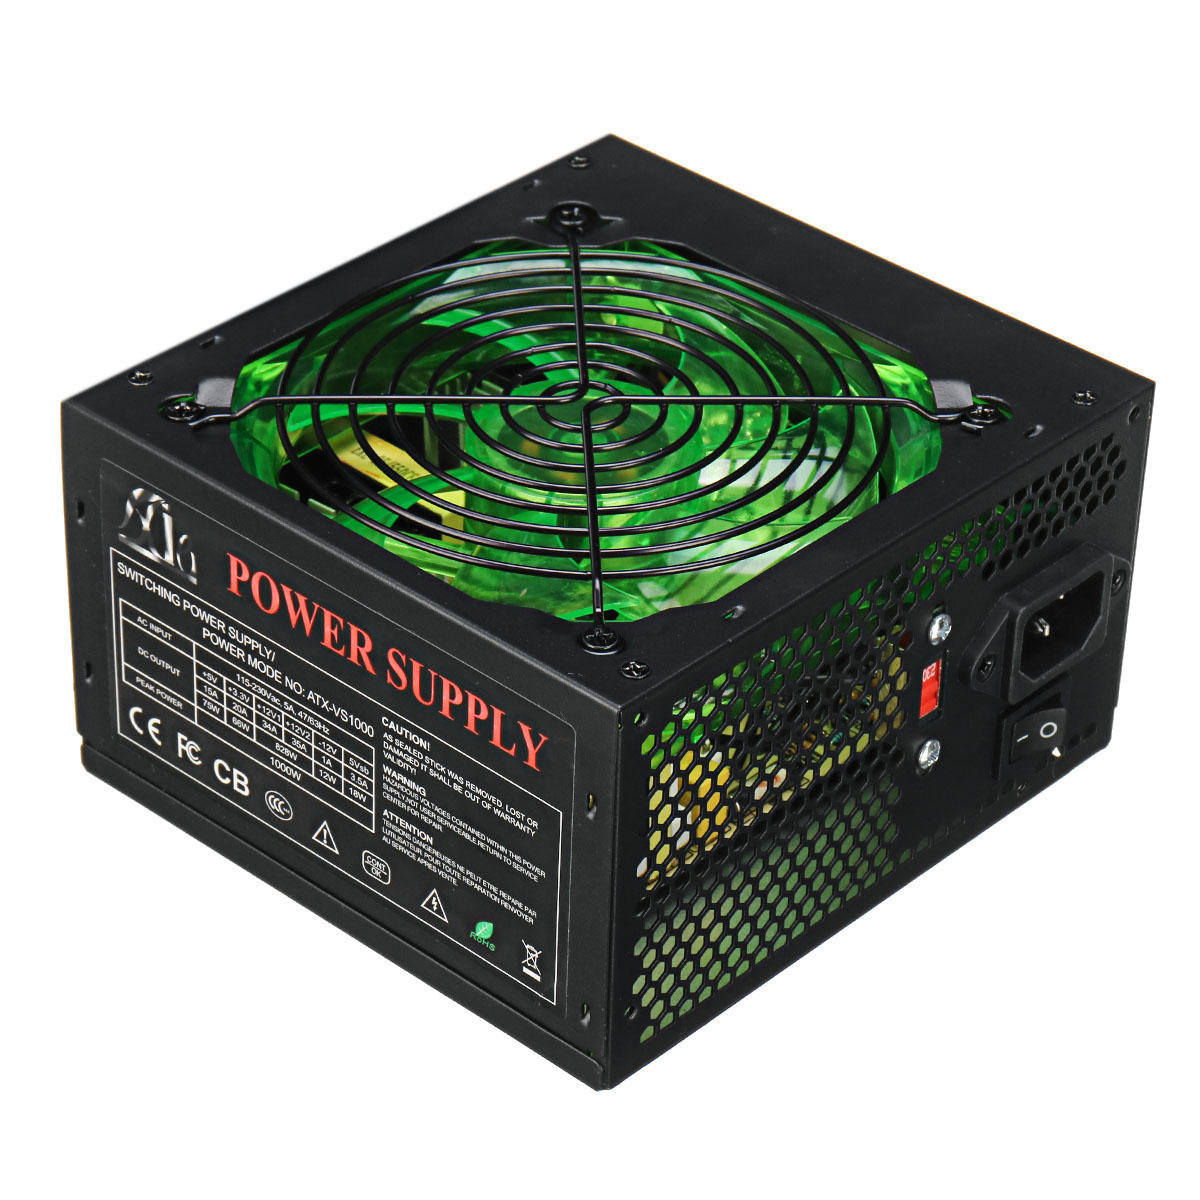 1000W Power Supply 120mm LED Fan 24 Pin PCI SATA ATX 12V Computer Power Supply for PC Compurter Case